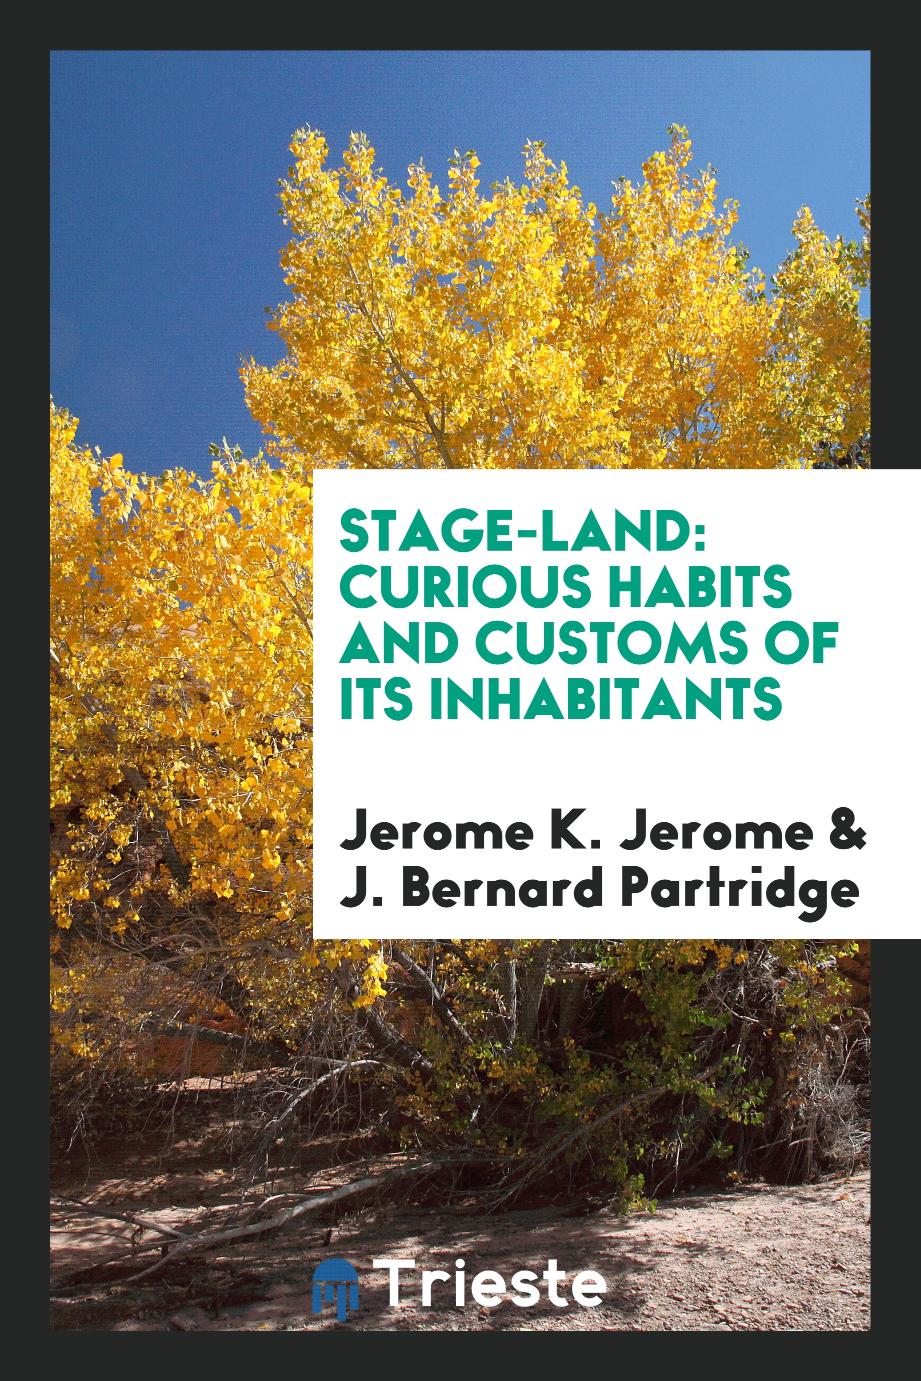 Stage-Land: Curious Habits and Customs of Its Inhabitants